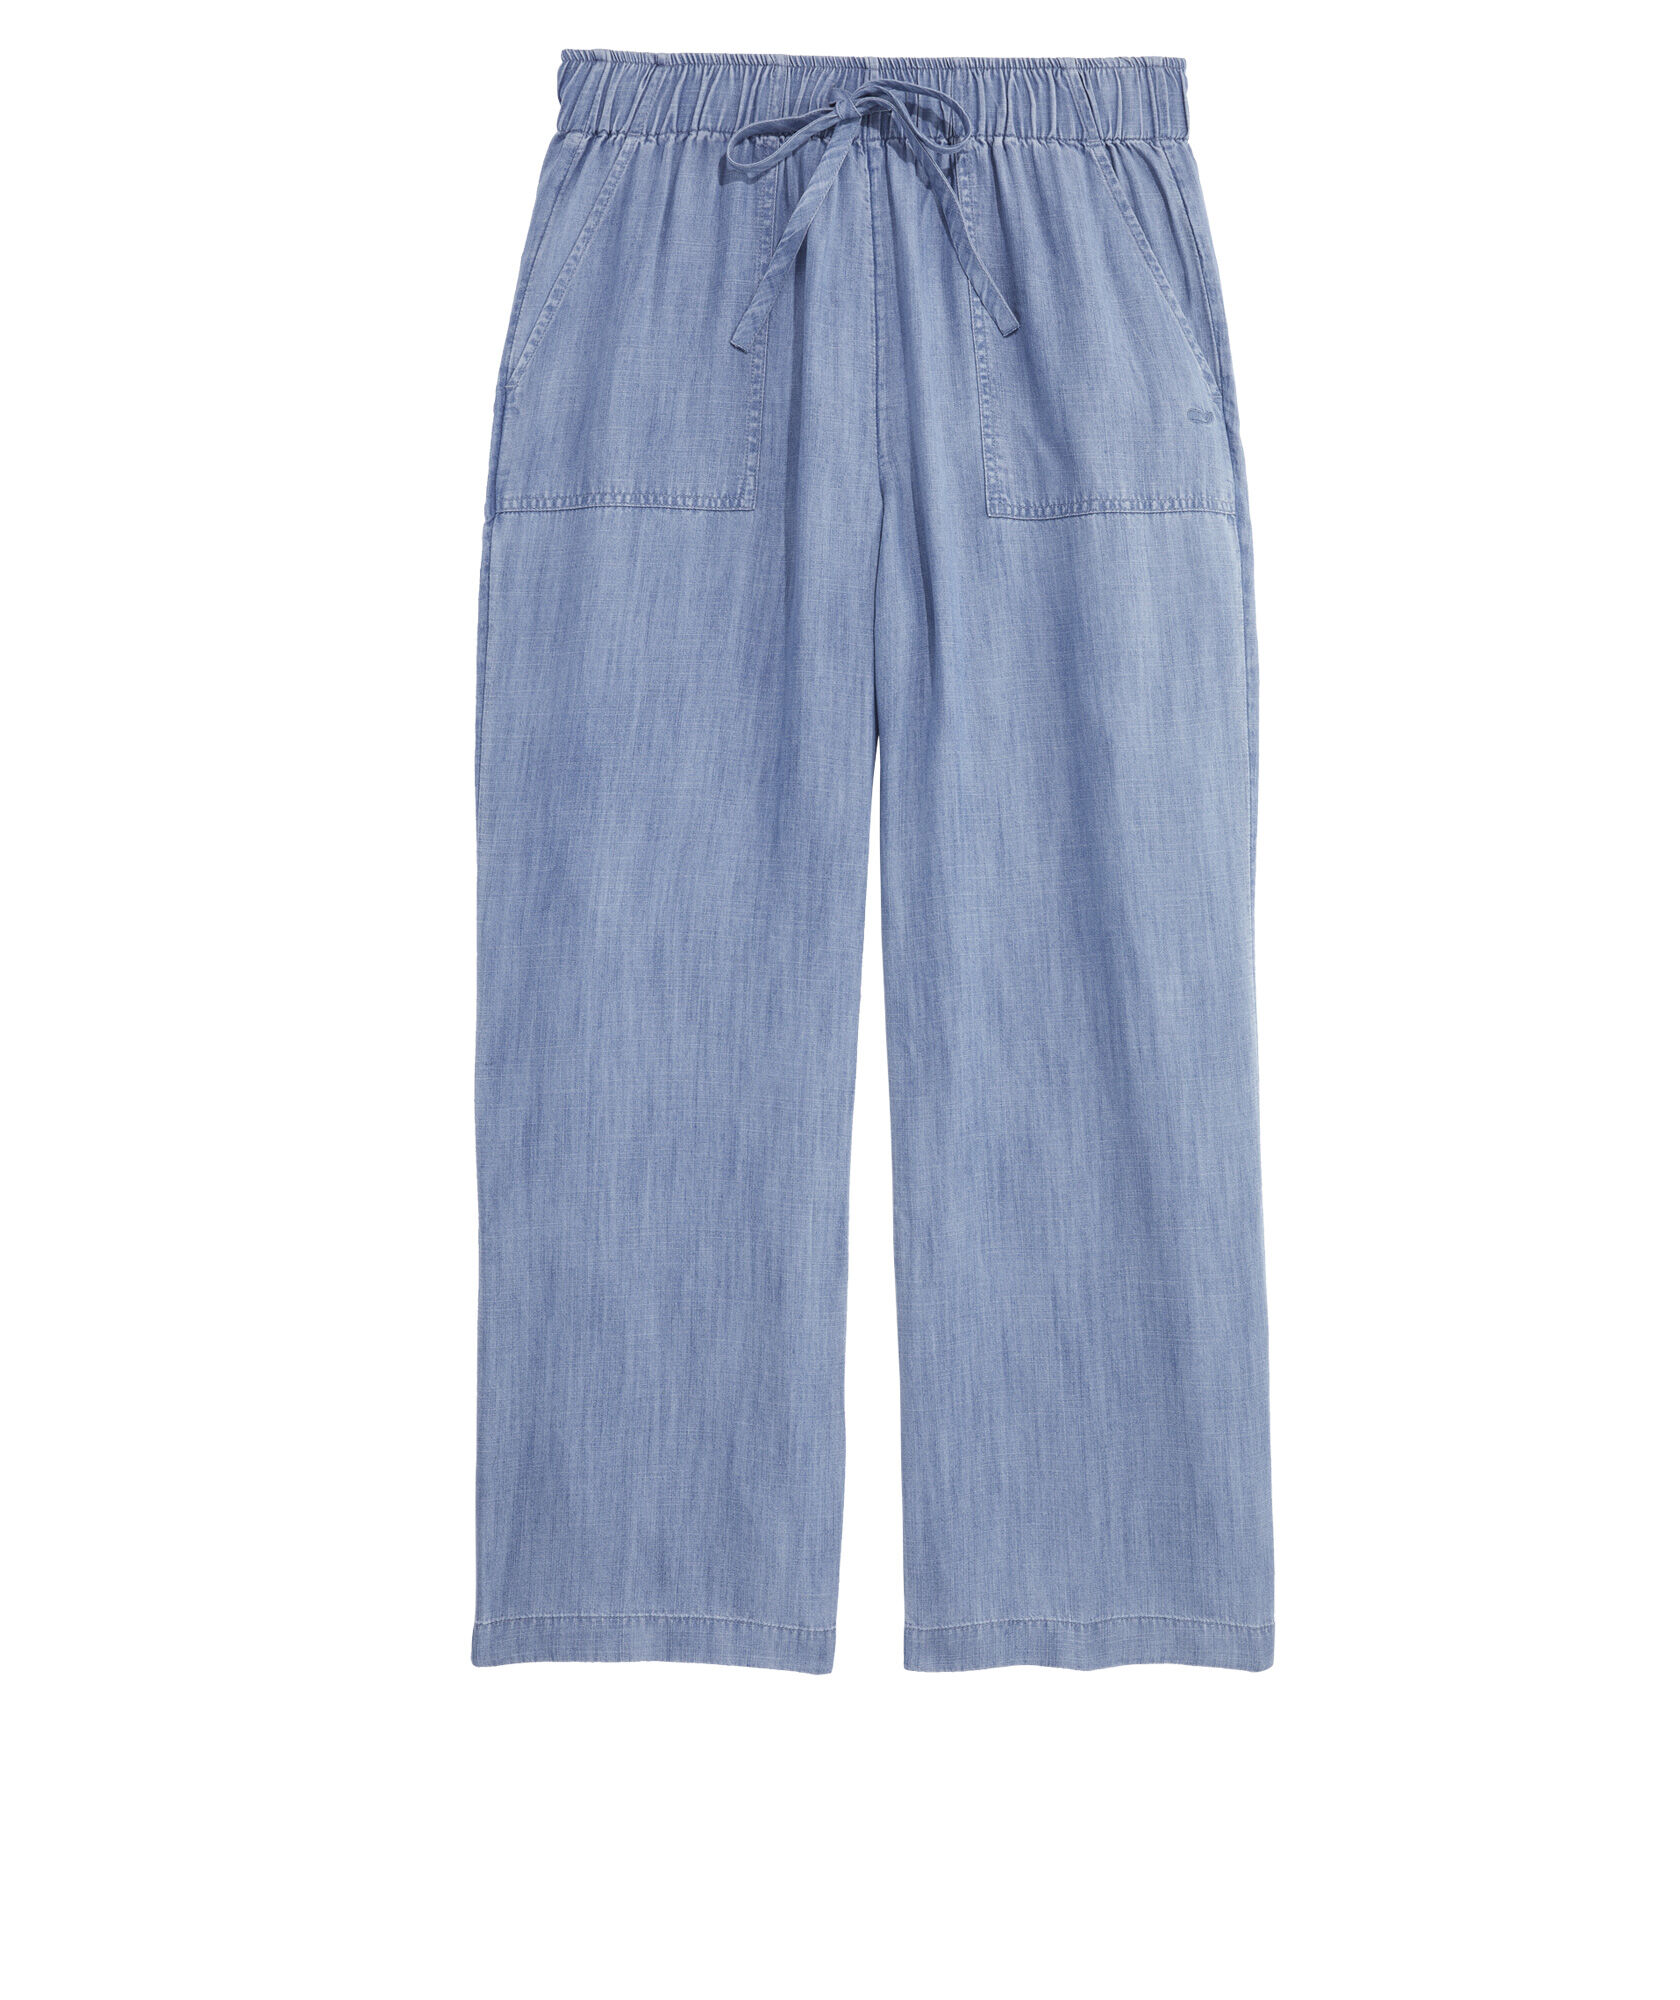 OUTLET Chambray Pull-On Pants